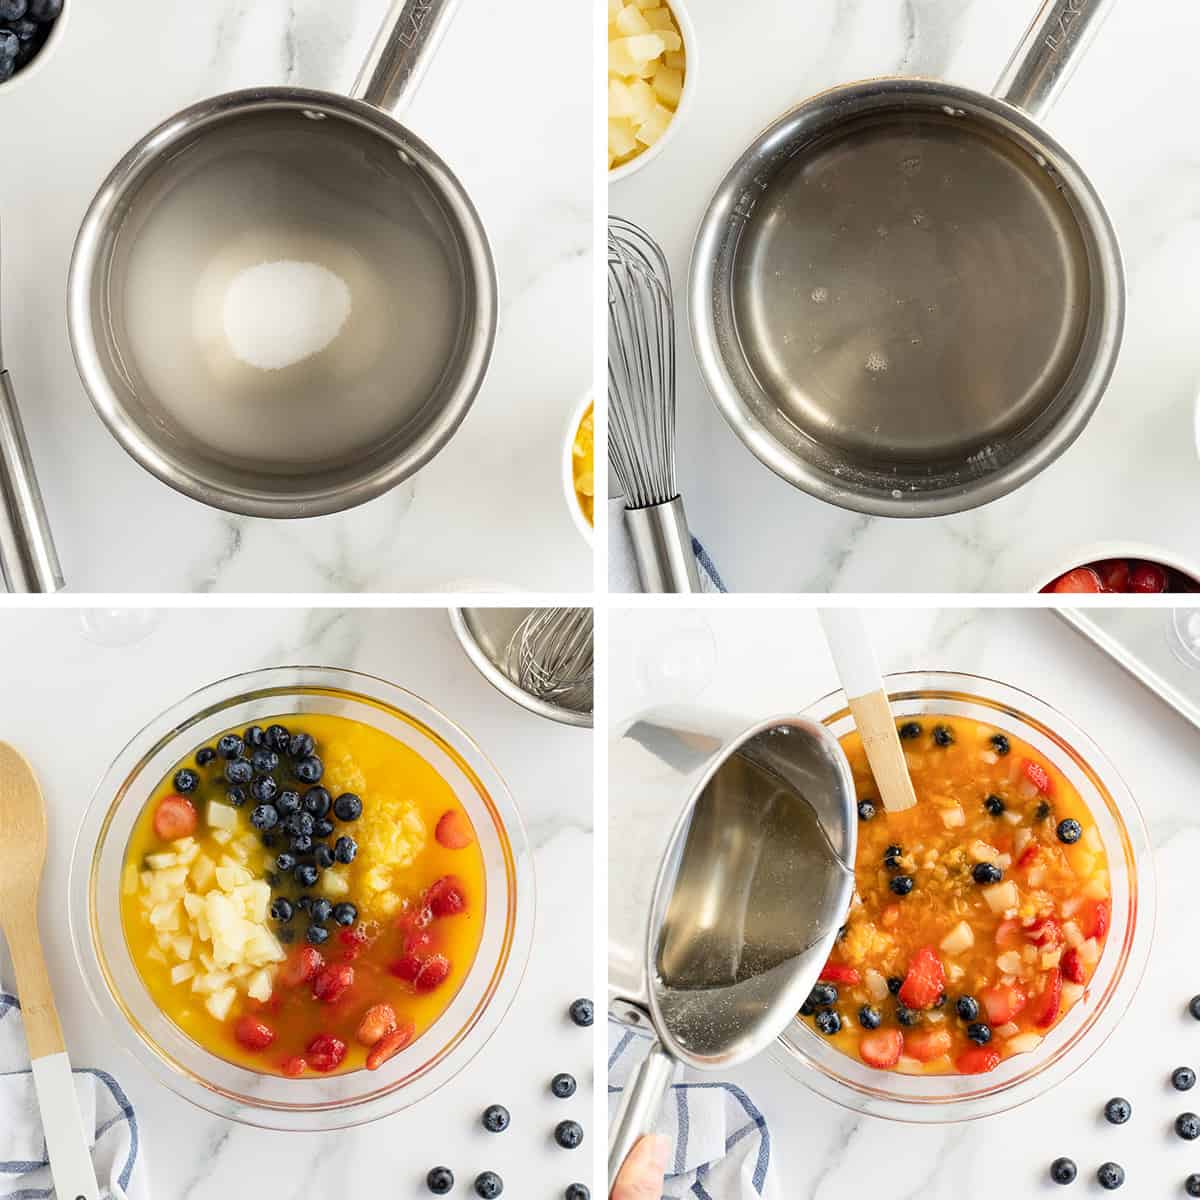 Four images showing simple syrup in a saucepan and being poured into a bowl of fruit.